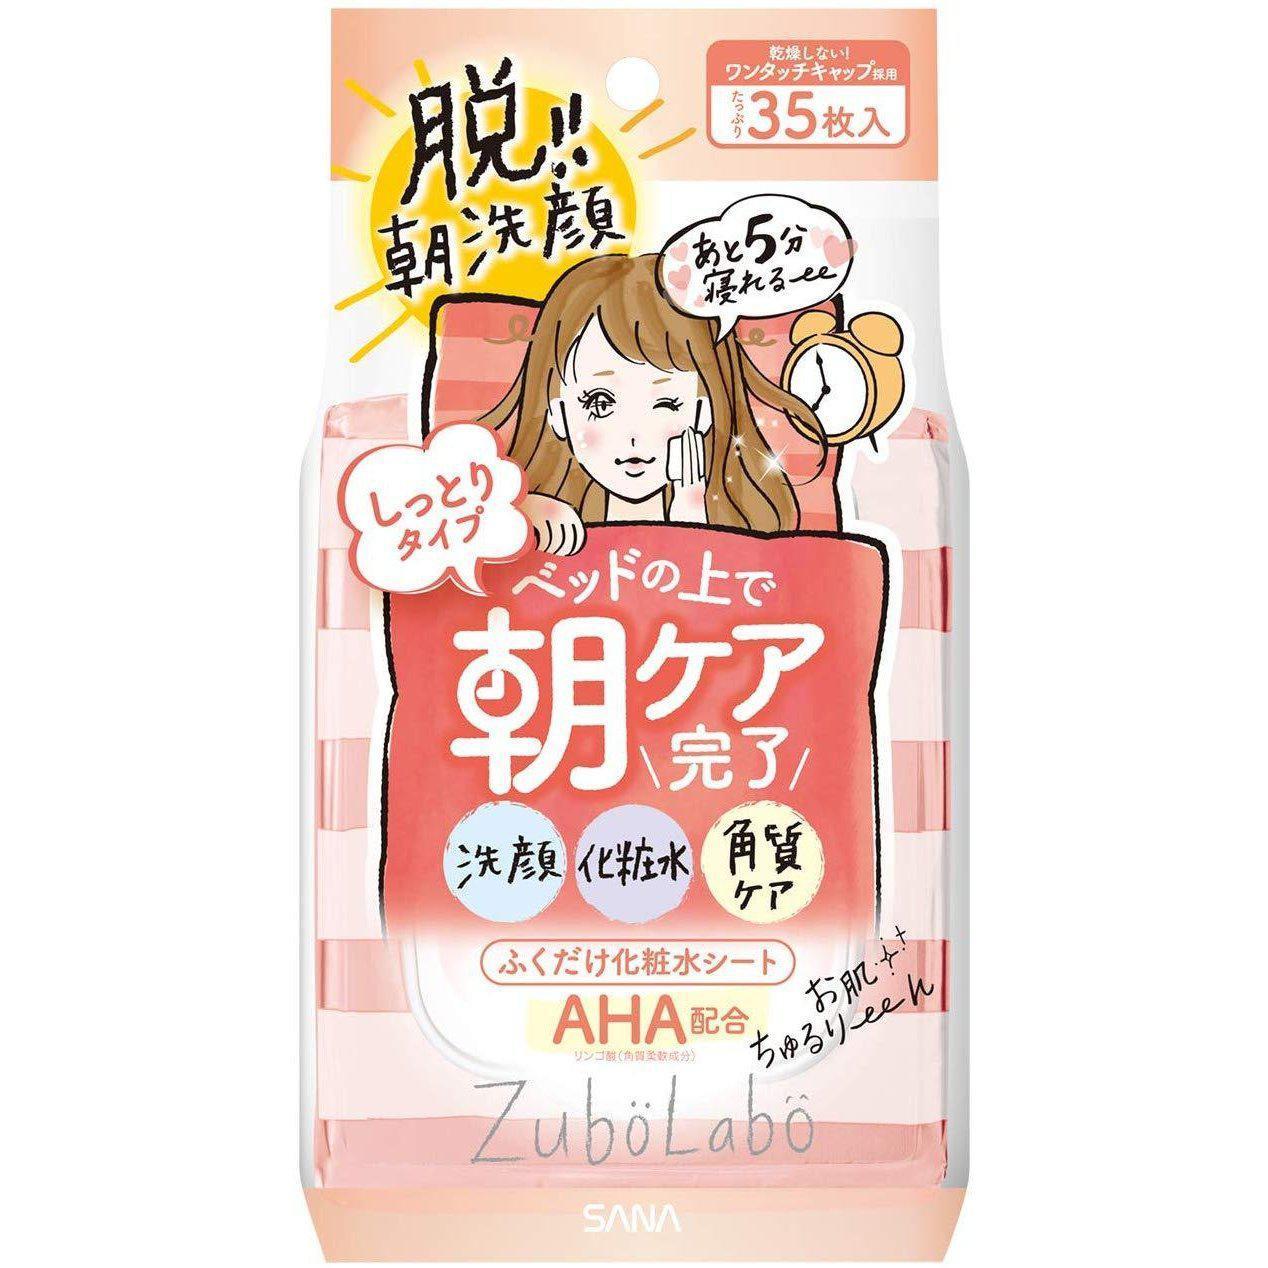 Zubo Labo Cleansing Sheets Morning Clear Face Wipes 35 ct.